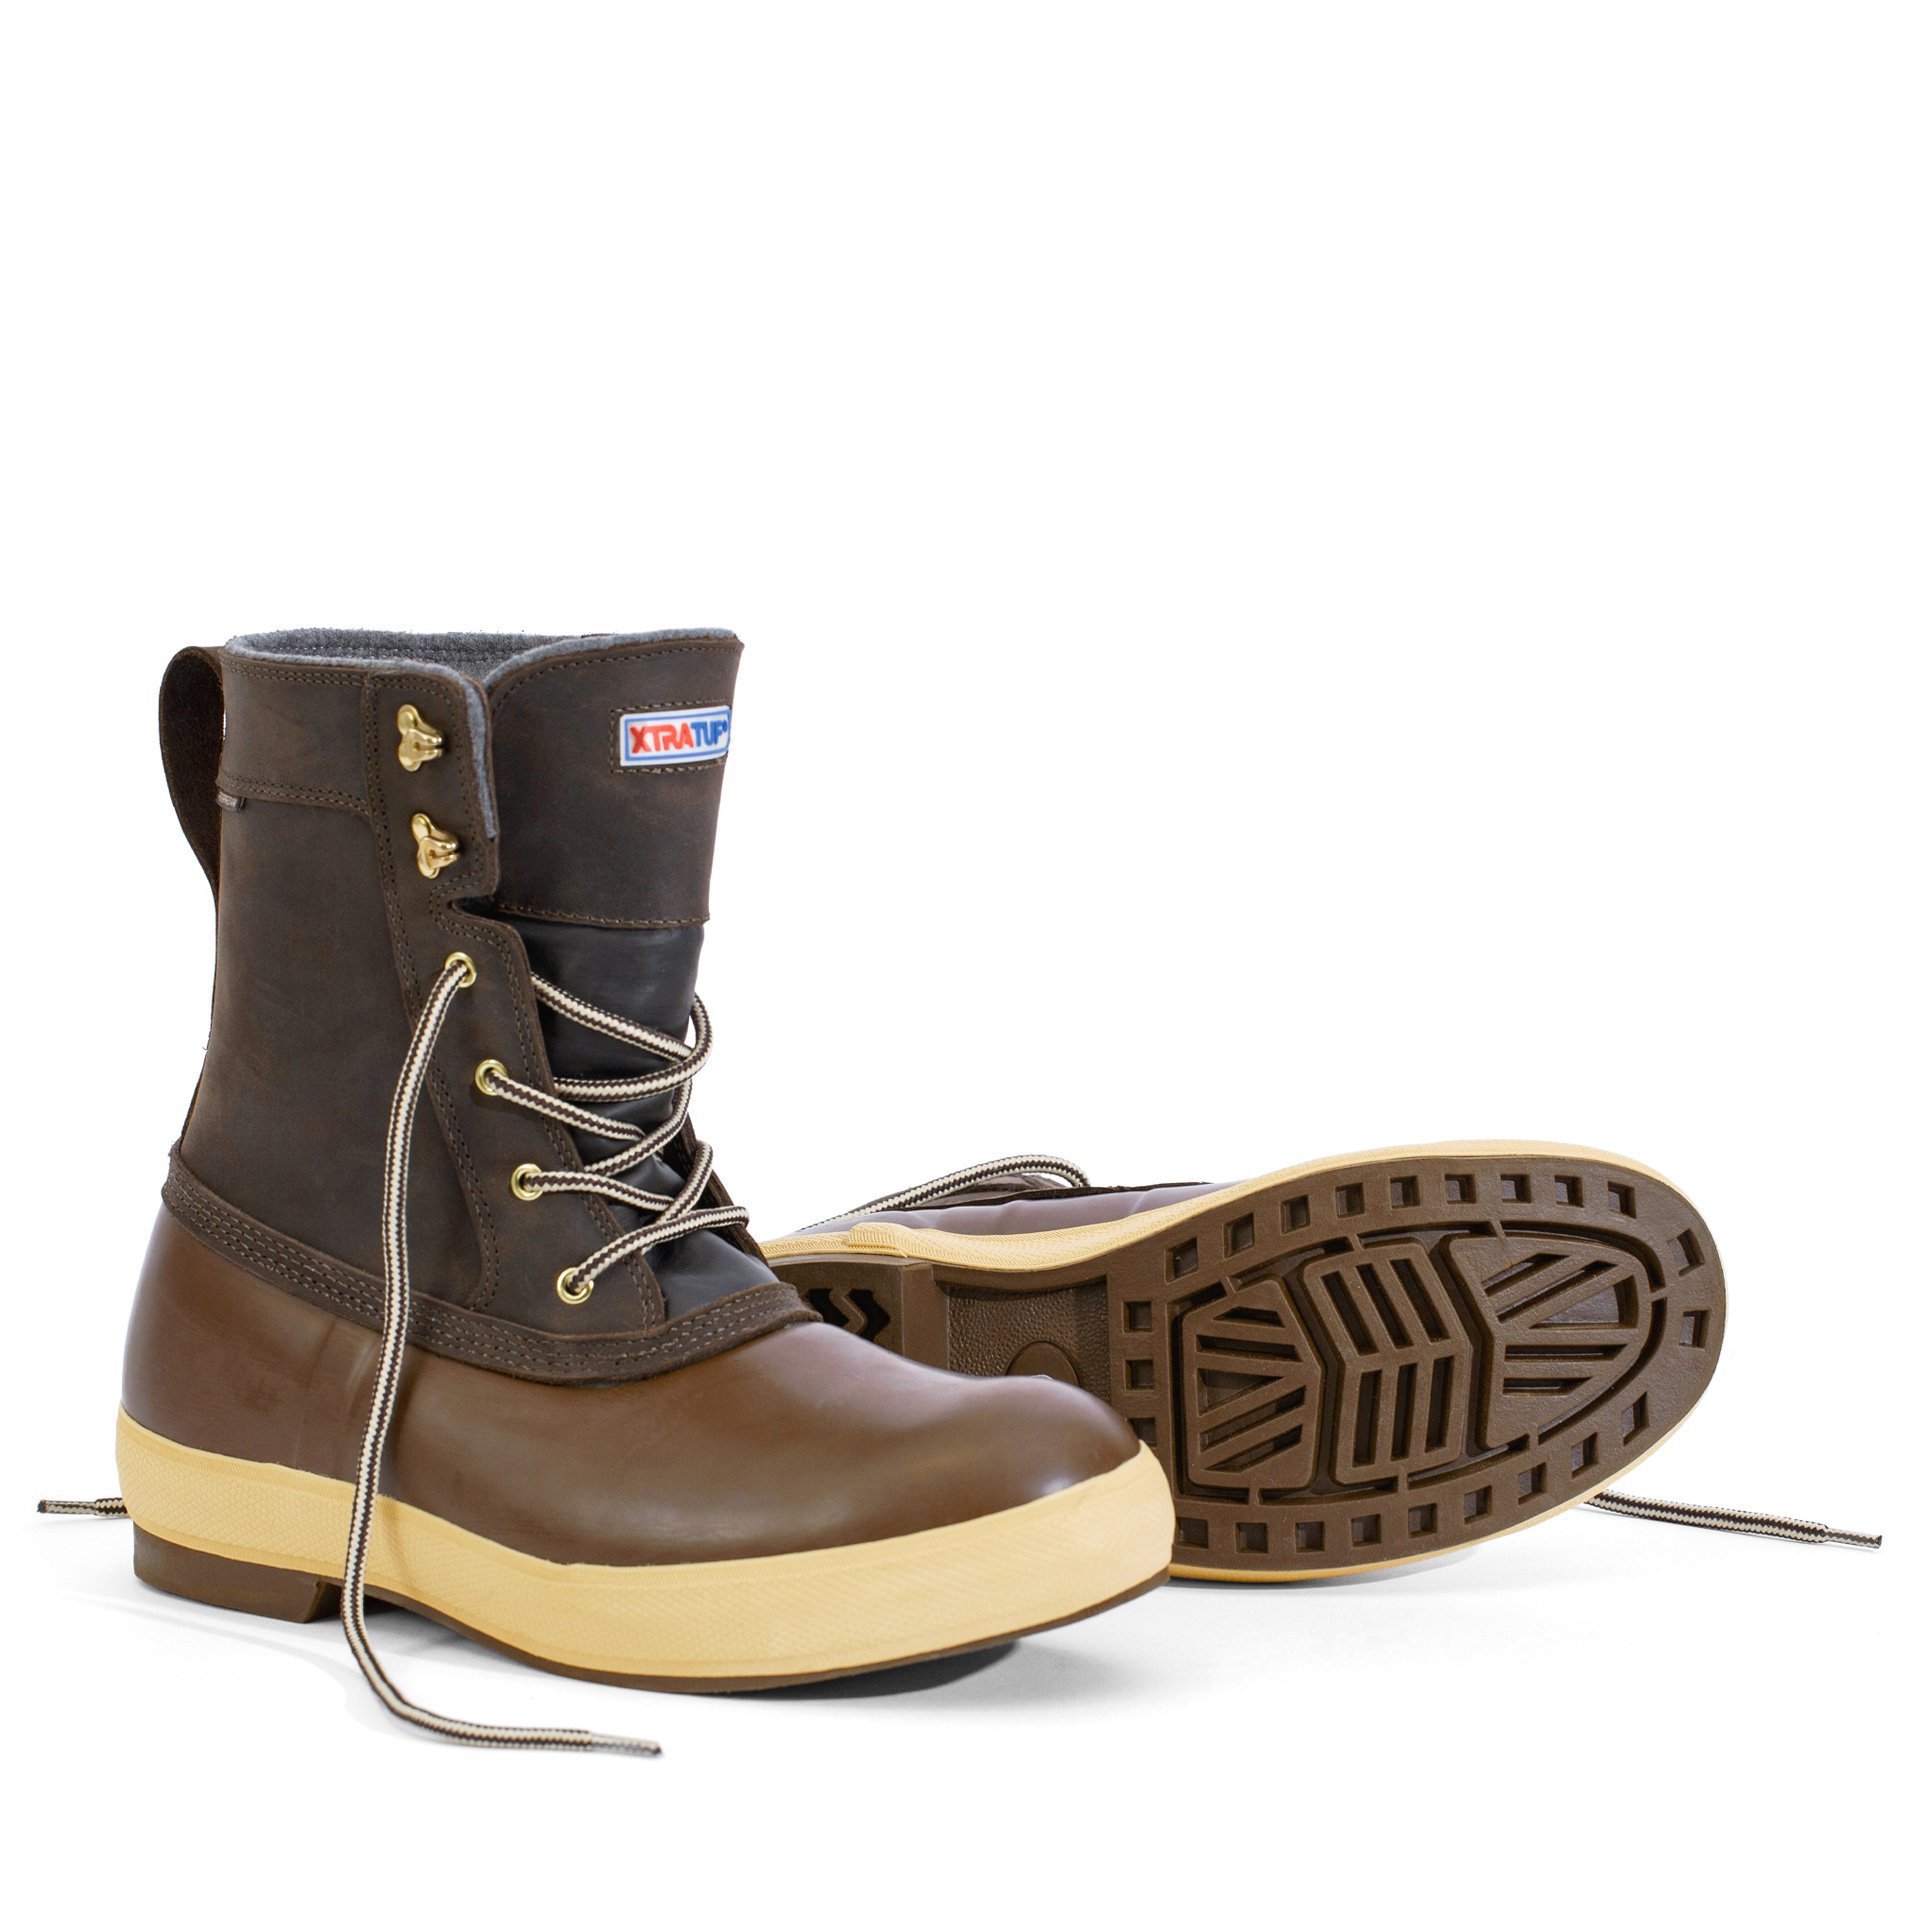 Xtratuf 8in Insulated Legacy Lace Boot - Men's , Up to $10.05 Off